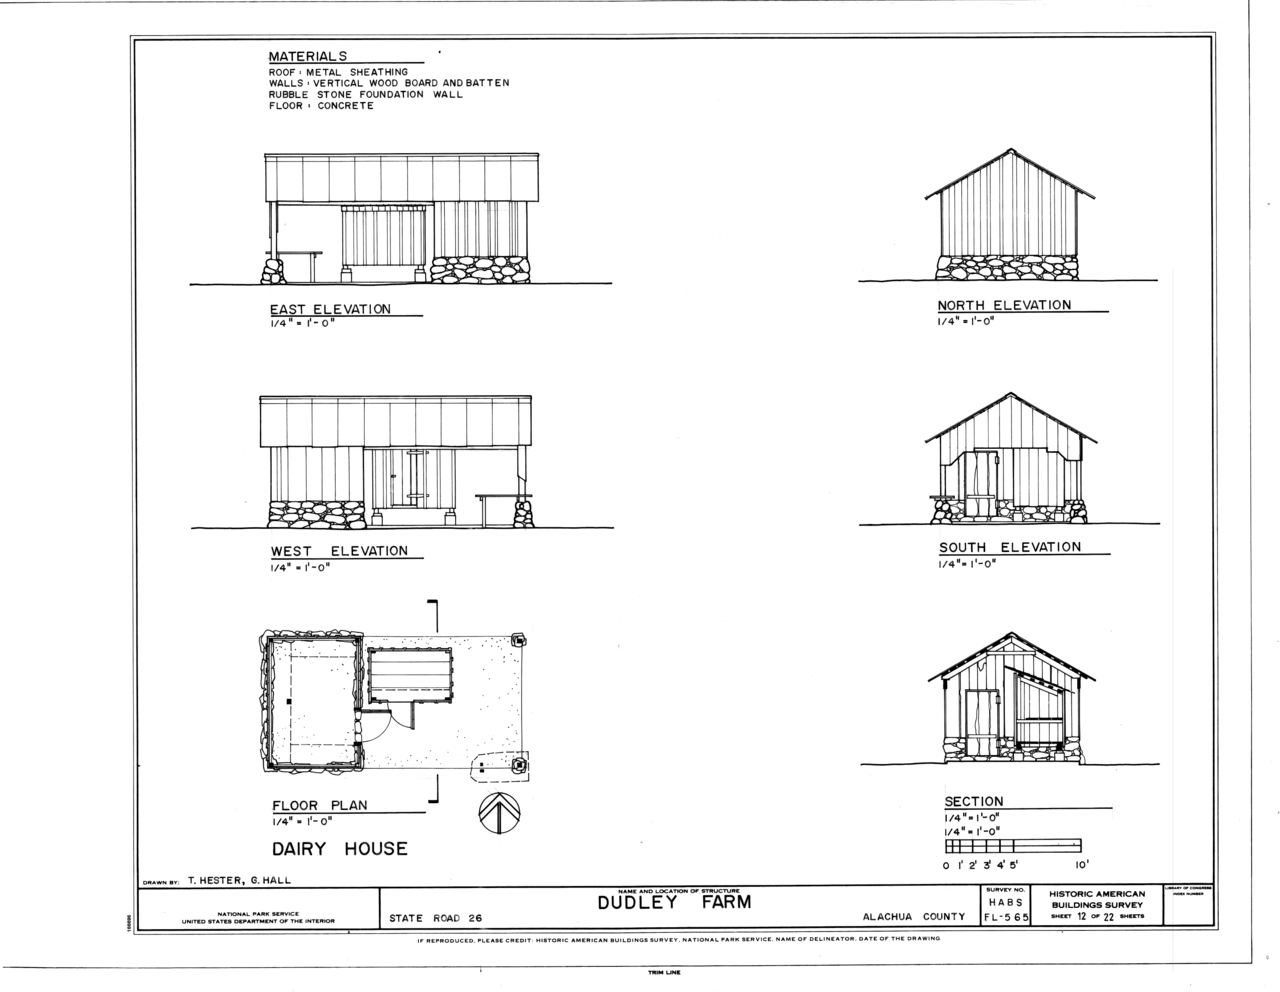 File Dairy House  Elevations  Floor Plan  and Section 